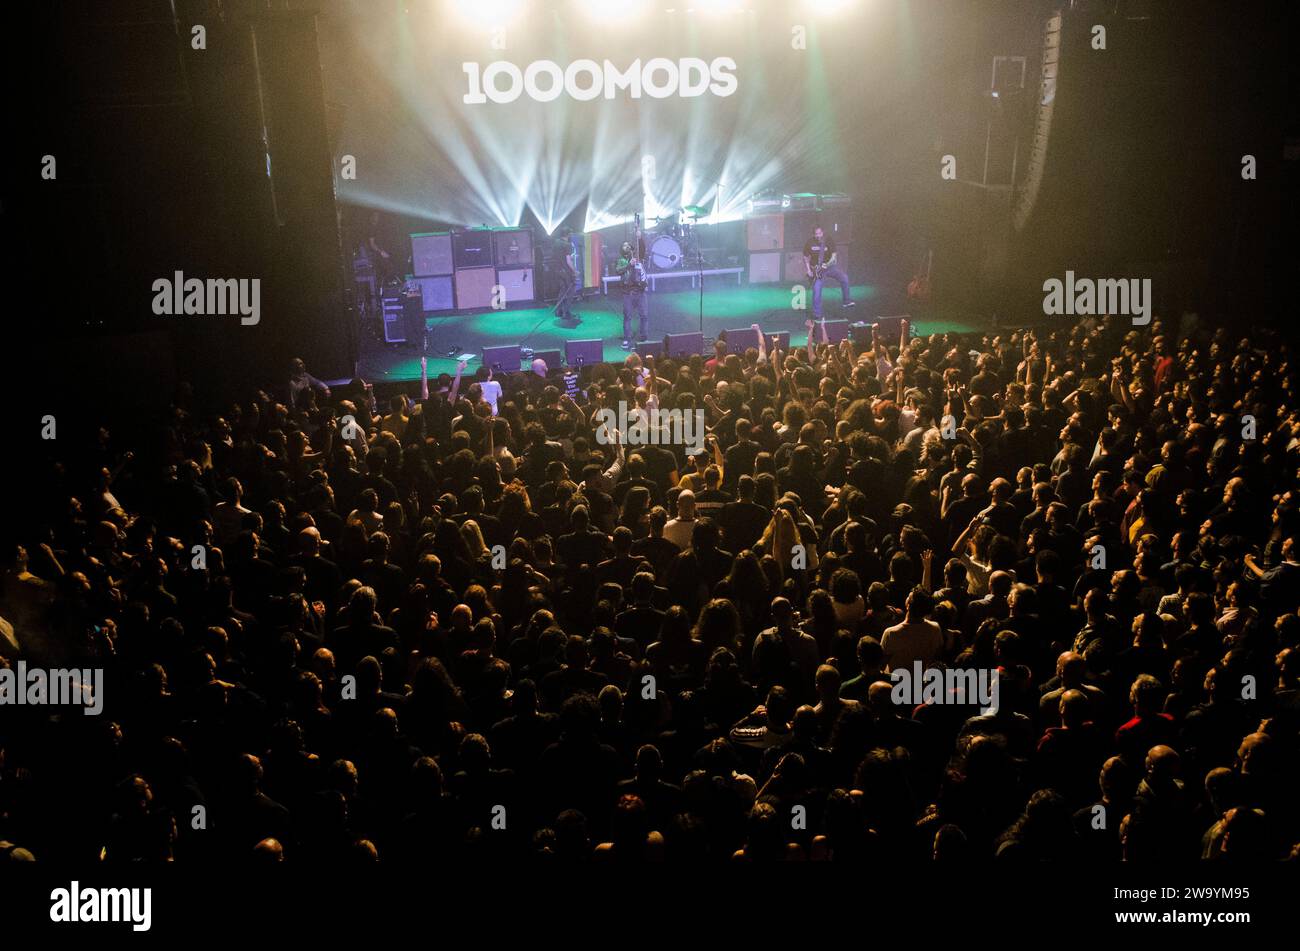 1000mods performing at Floyd Live Music Venue, Athens / Greece, December 2023 Stock Photo